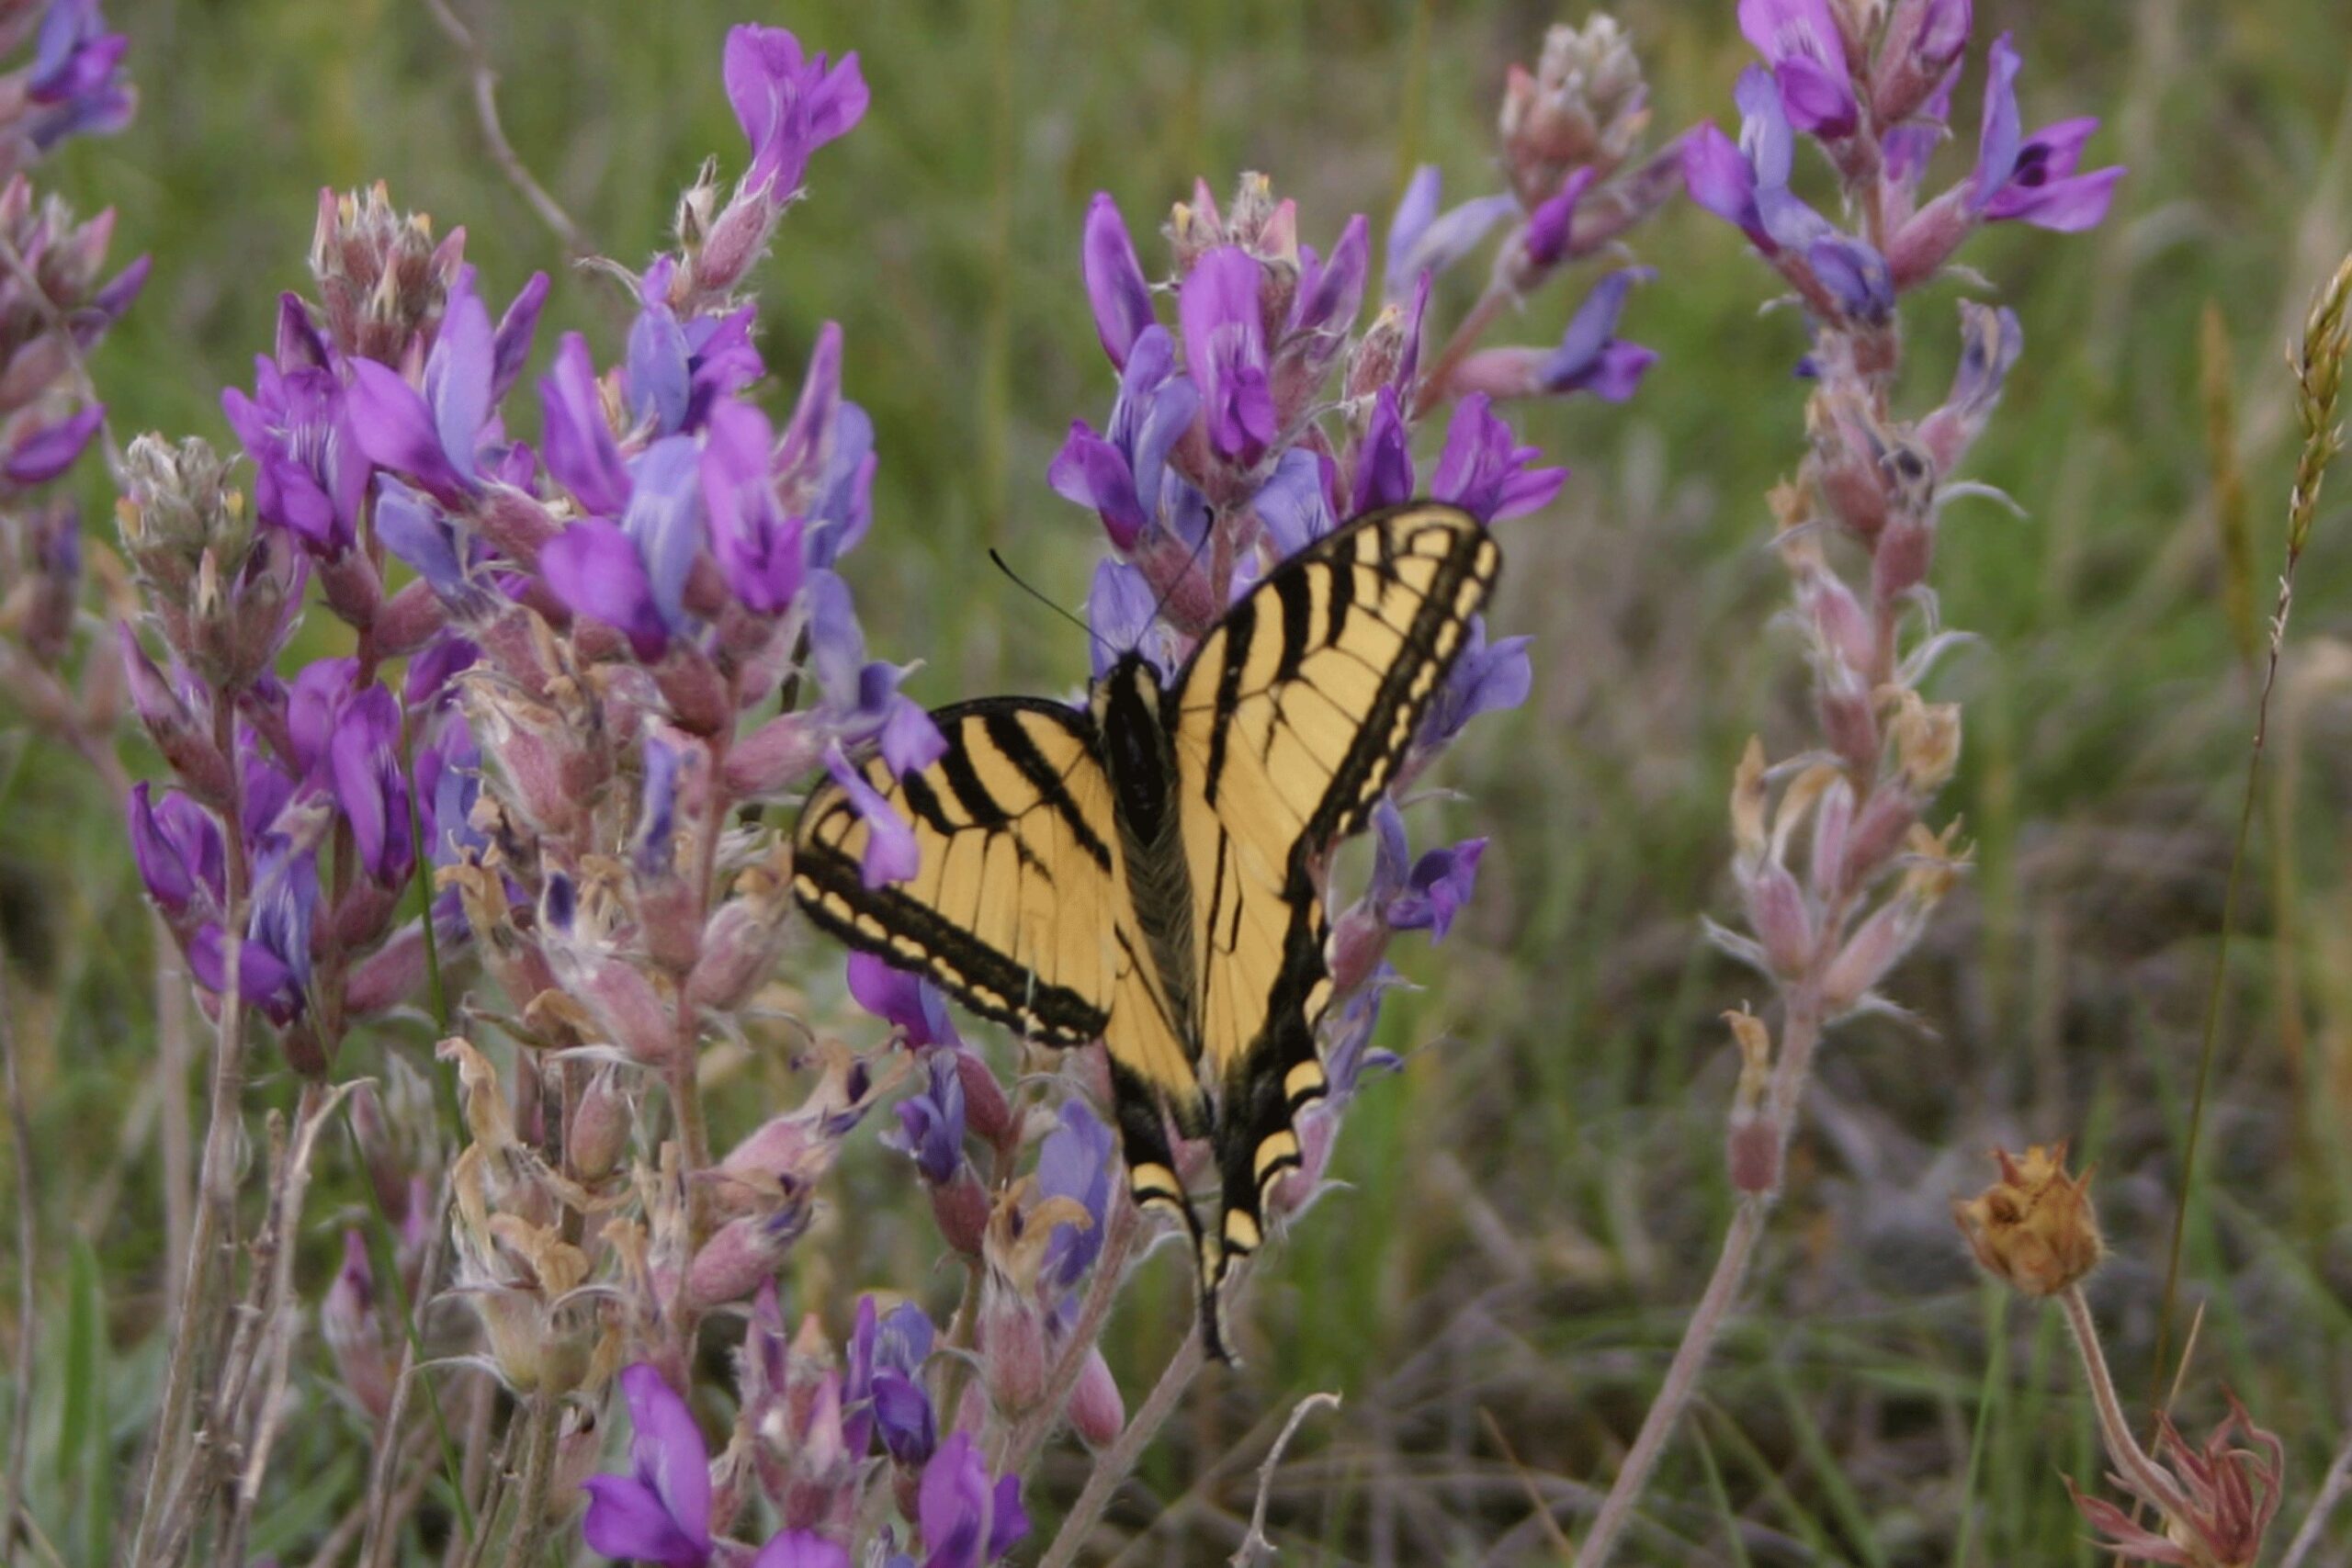 A yellow and black Tiger Swallowtail butterfly perched among the purple flowers of a Purple Locoweed.